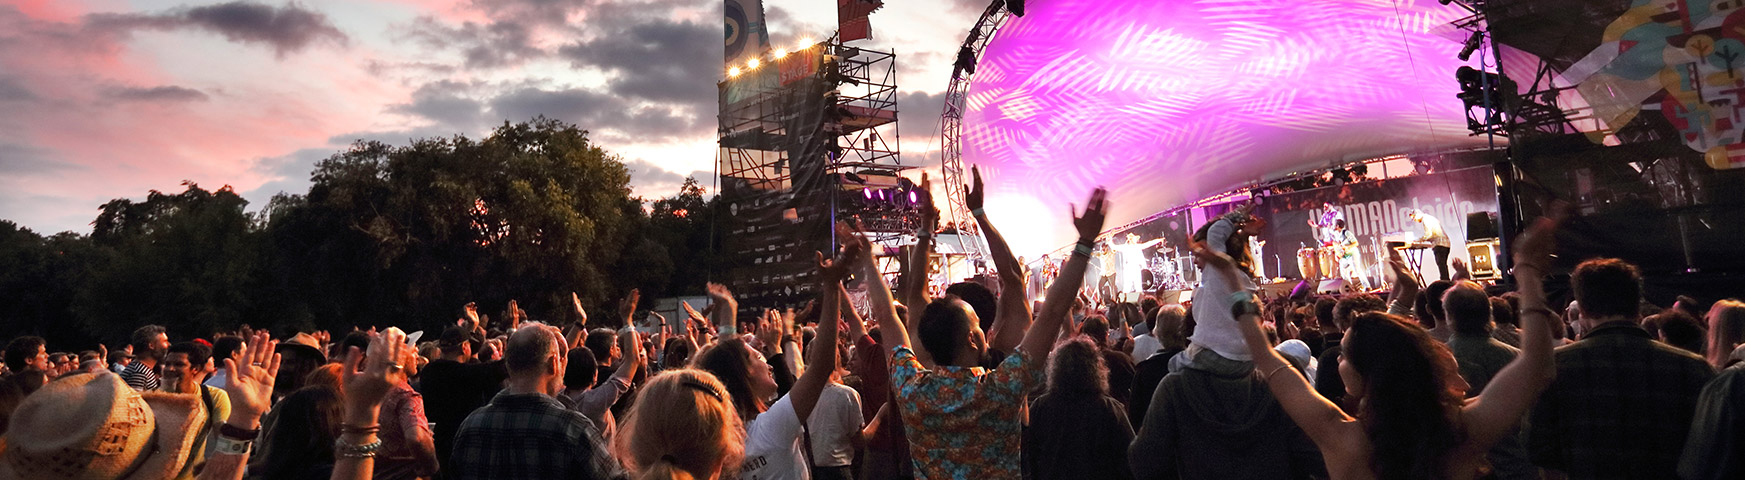 WOMADelaide 2017 Foundation Stage